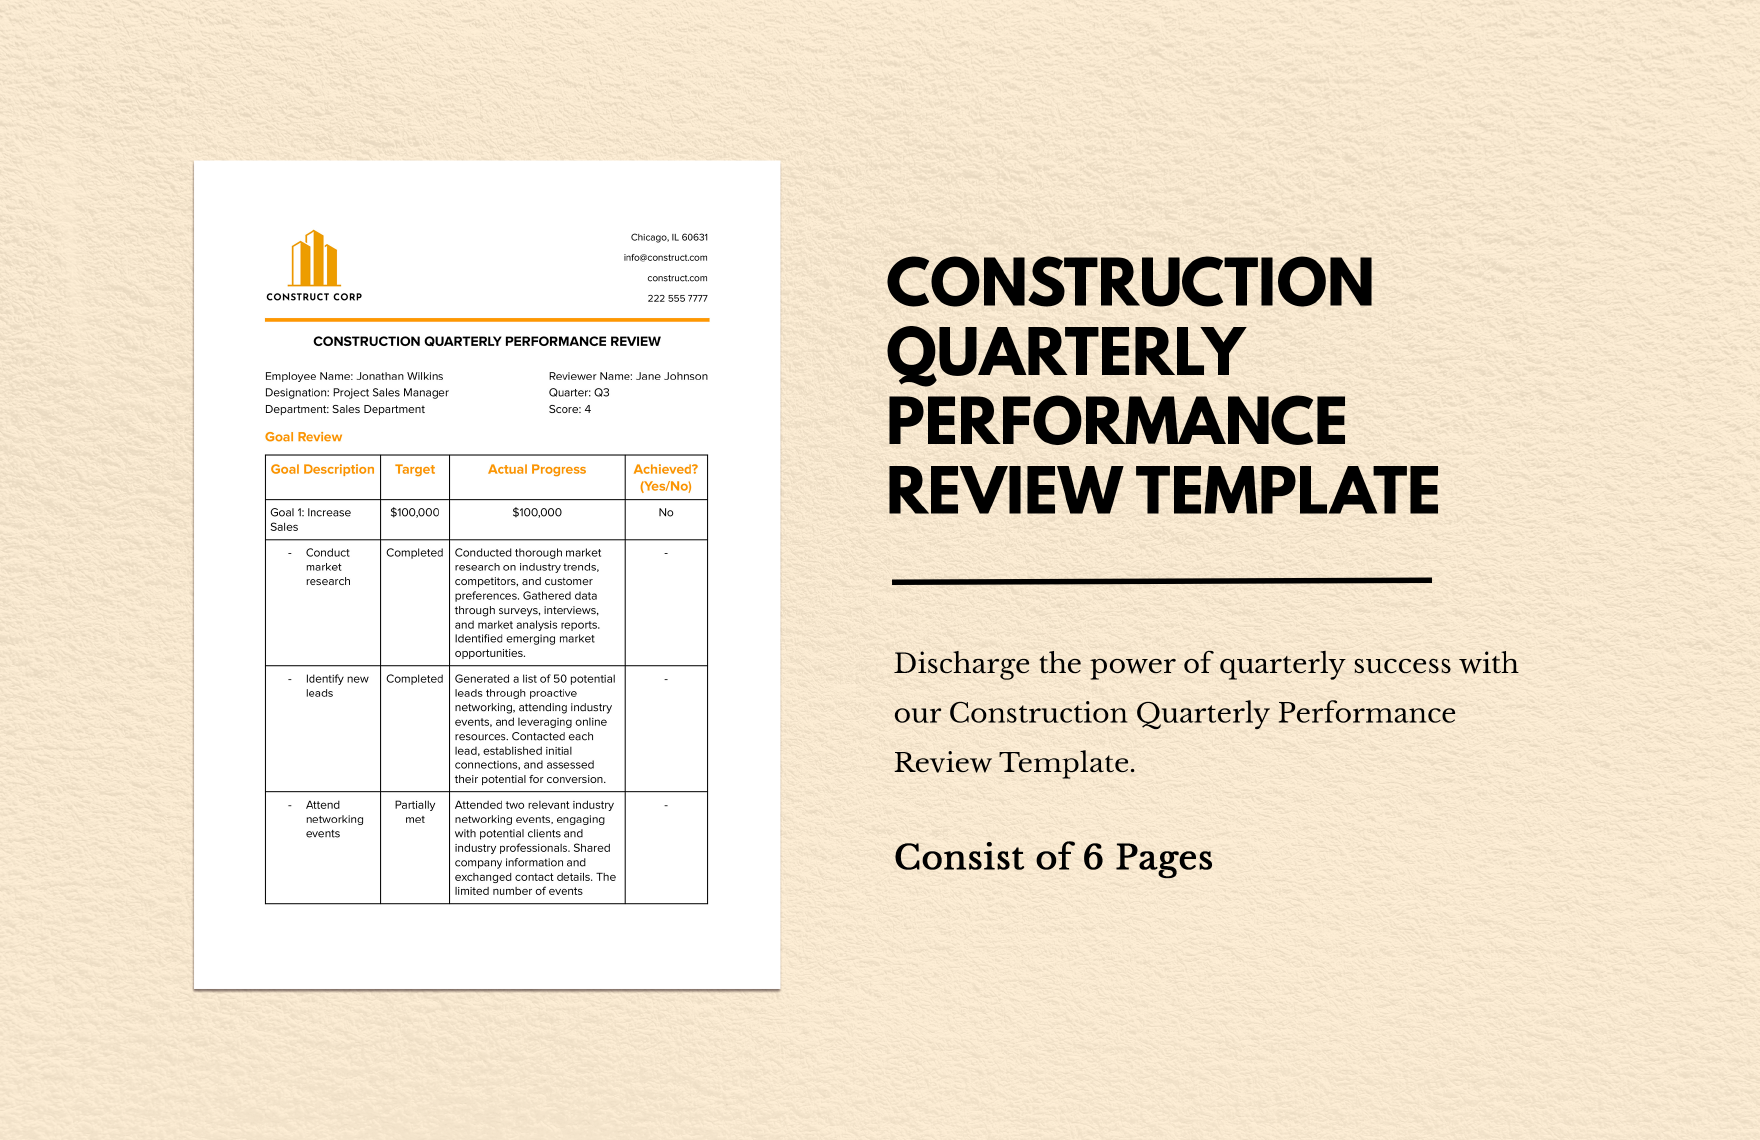 Construction Quarterly Performance Review 